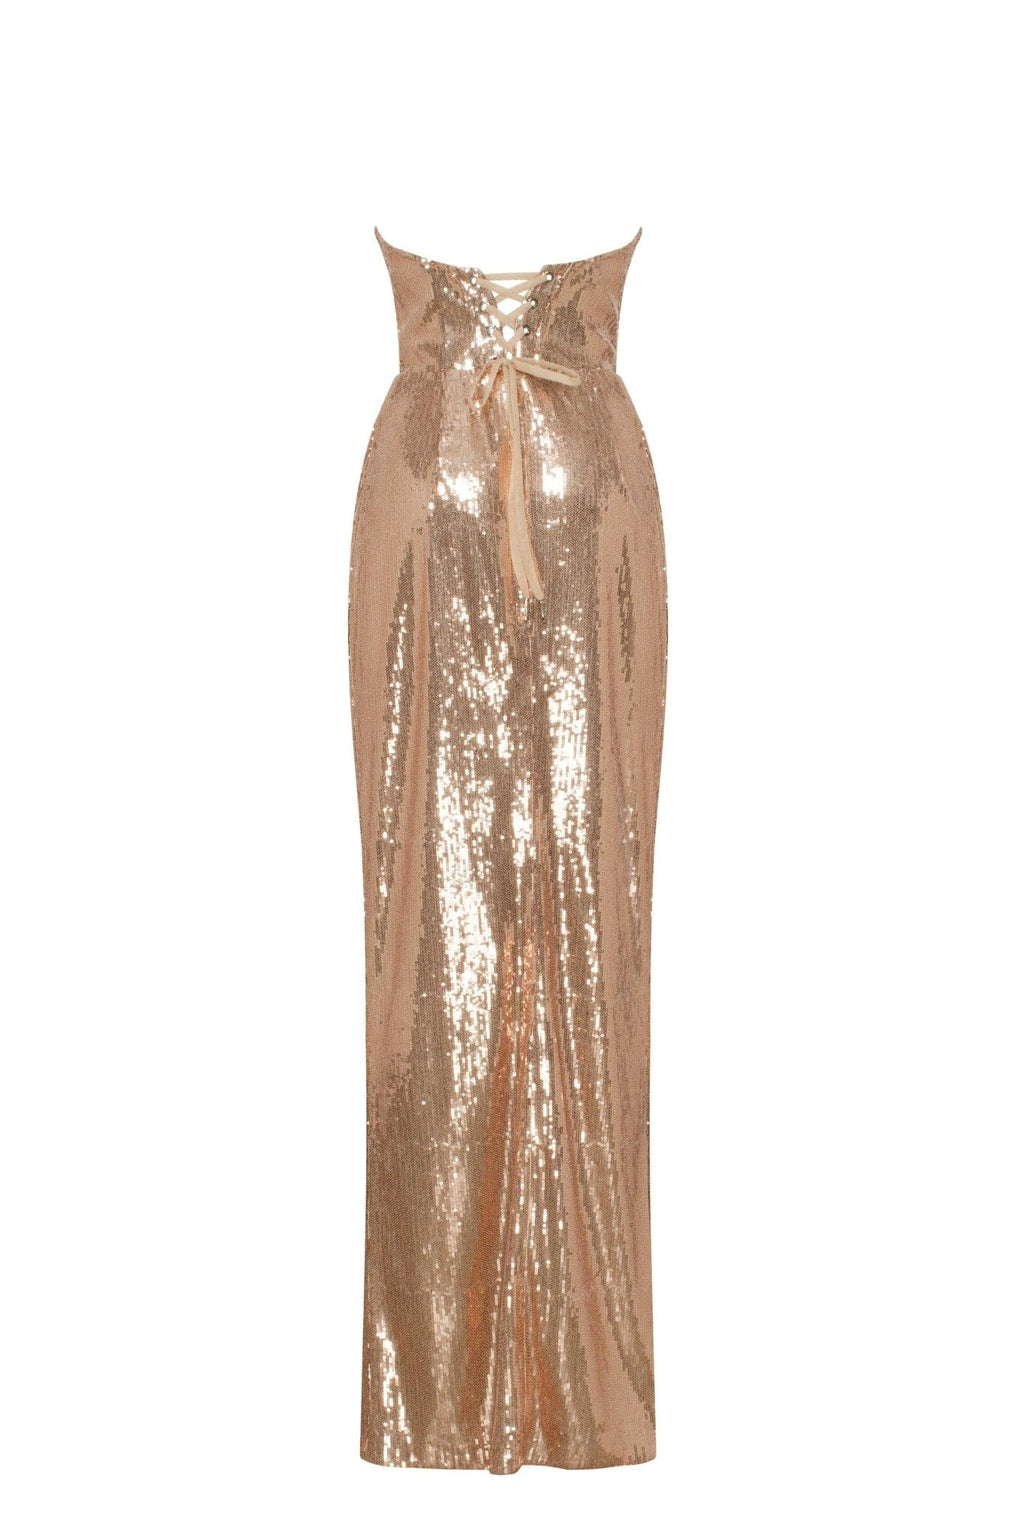 Spectacular gold sequined stretch-lace dress - Milla